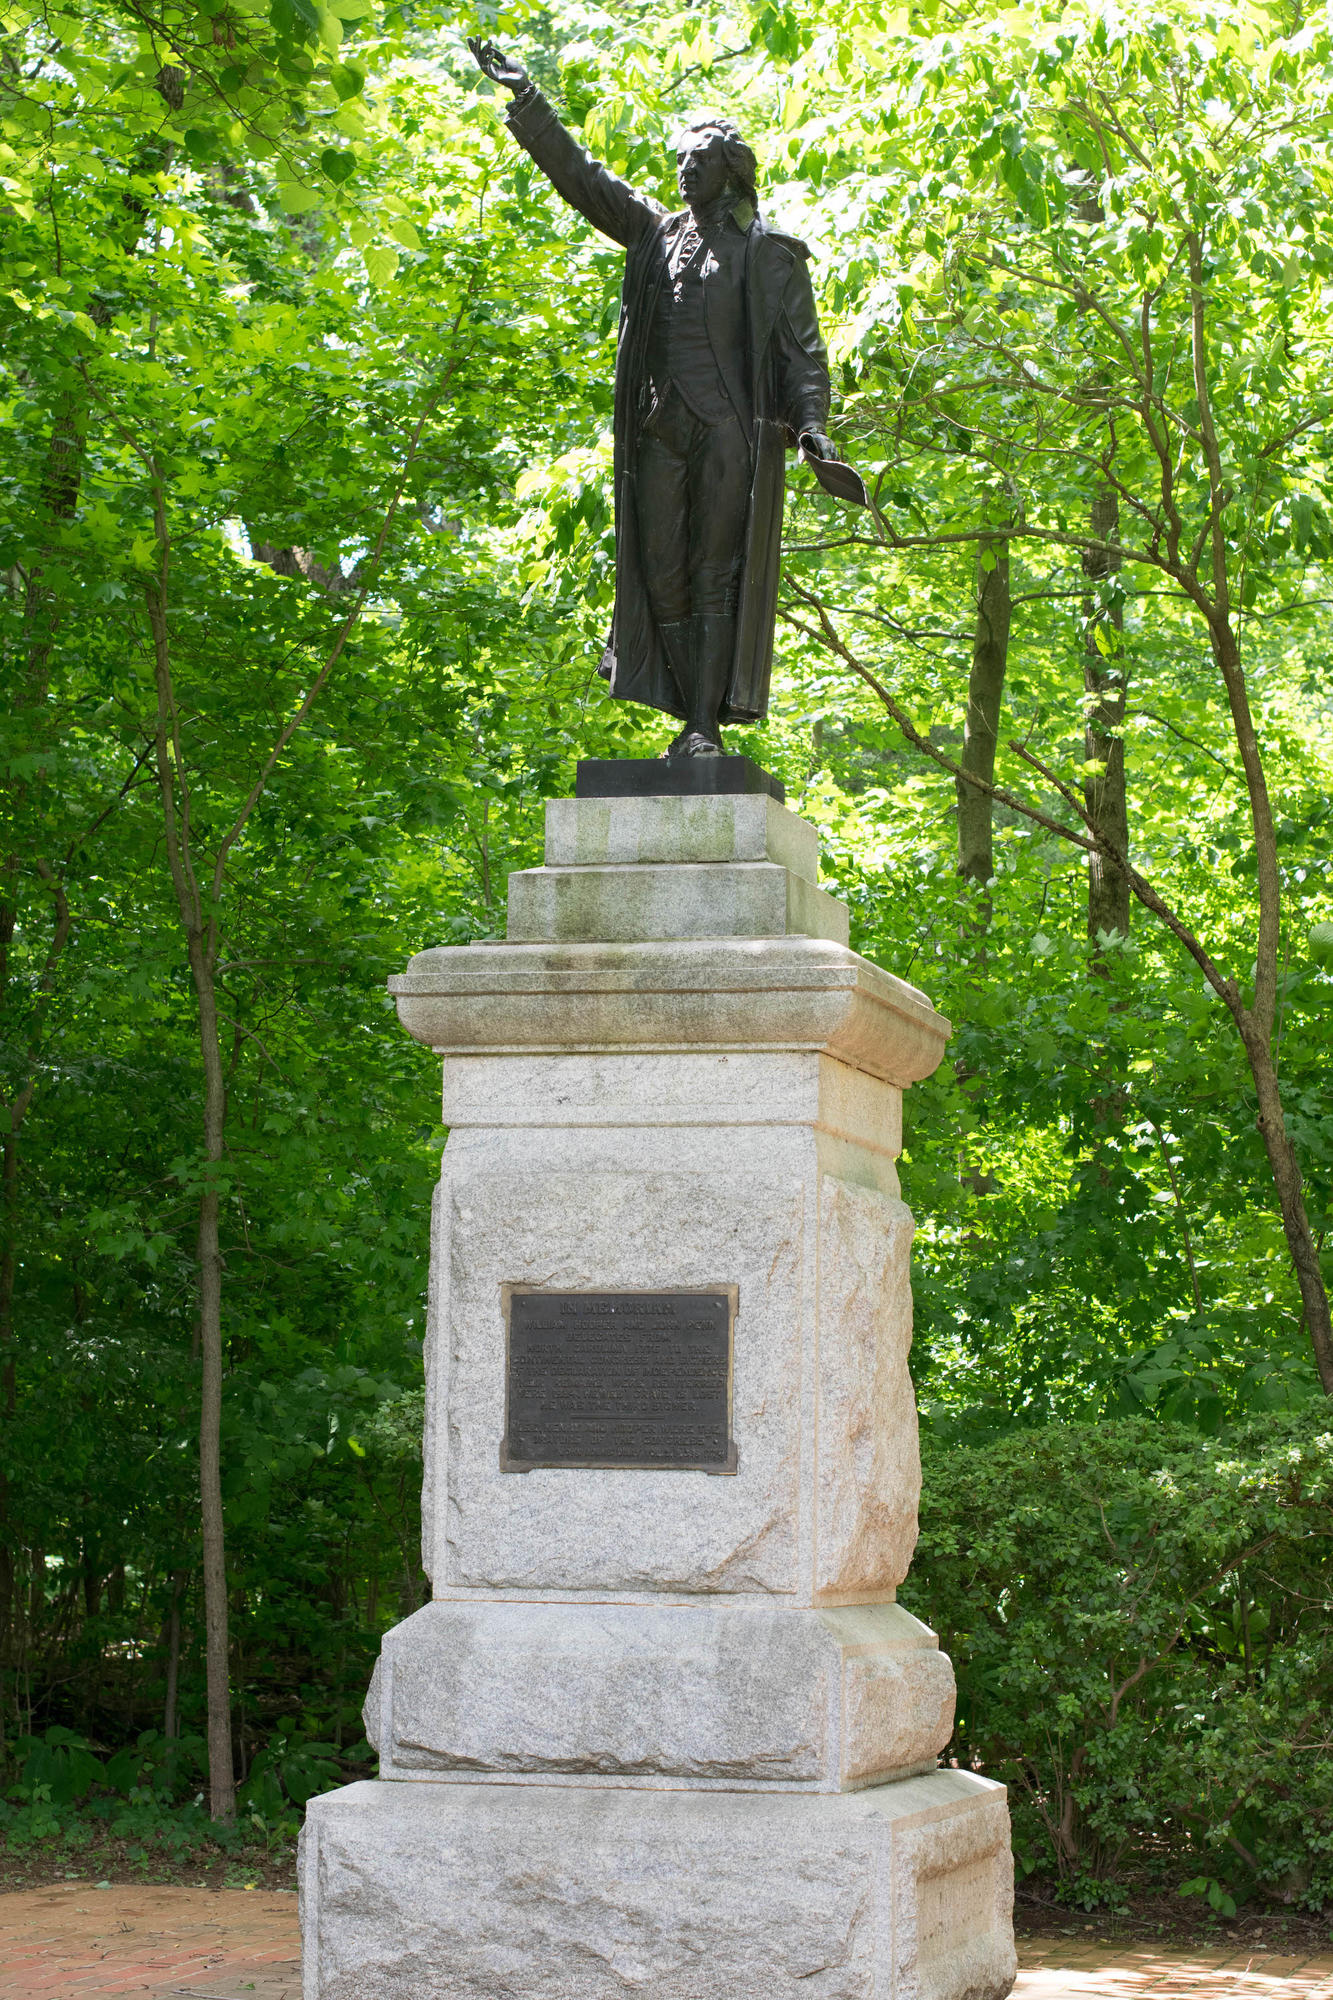 Signers Monument, Guilford Courthouse NMP